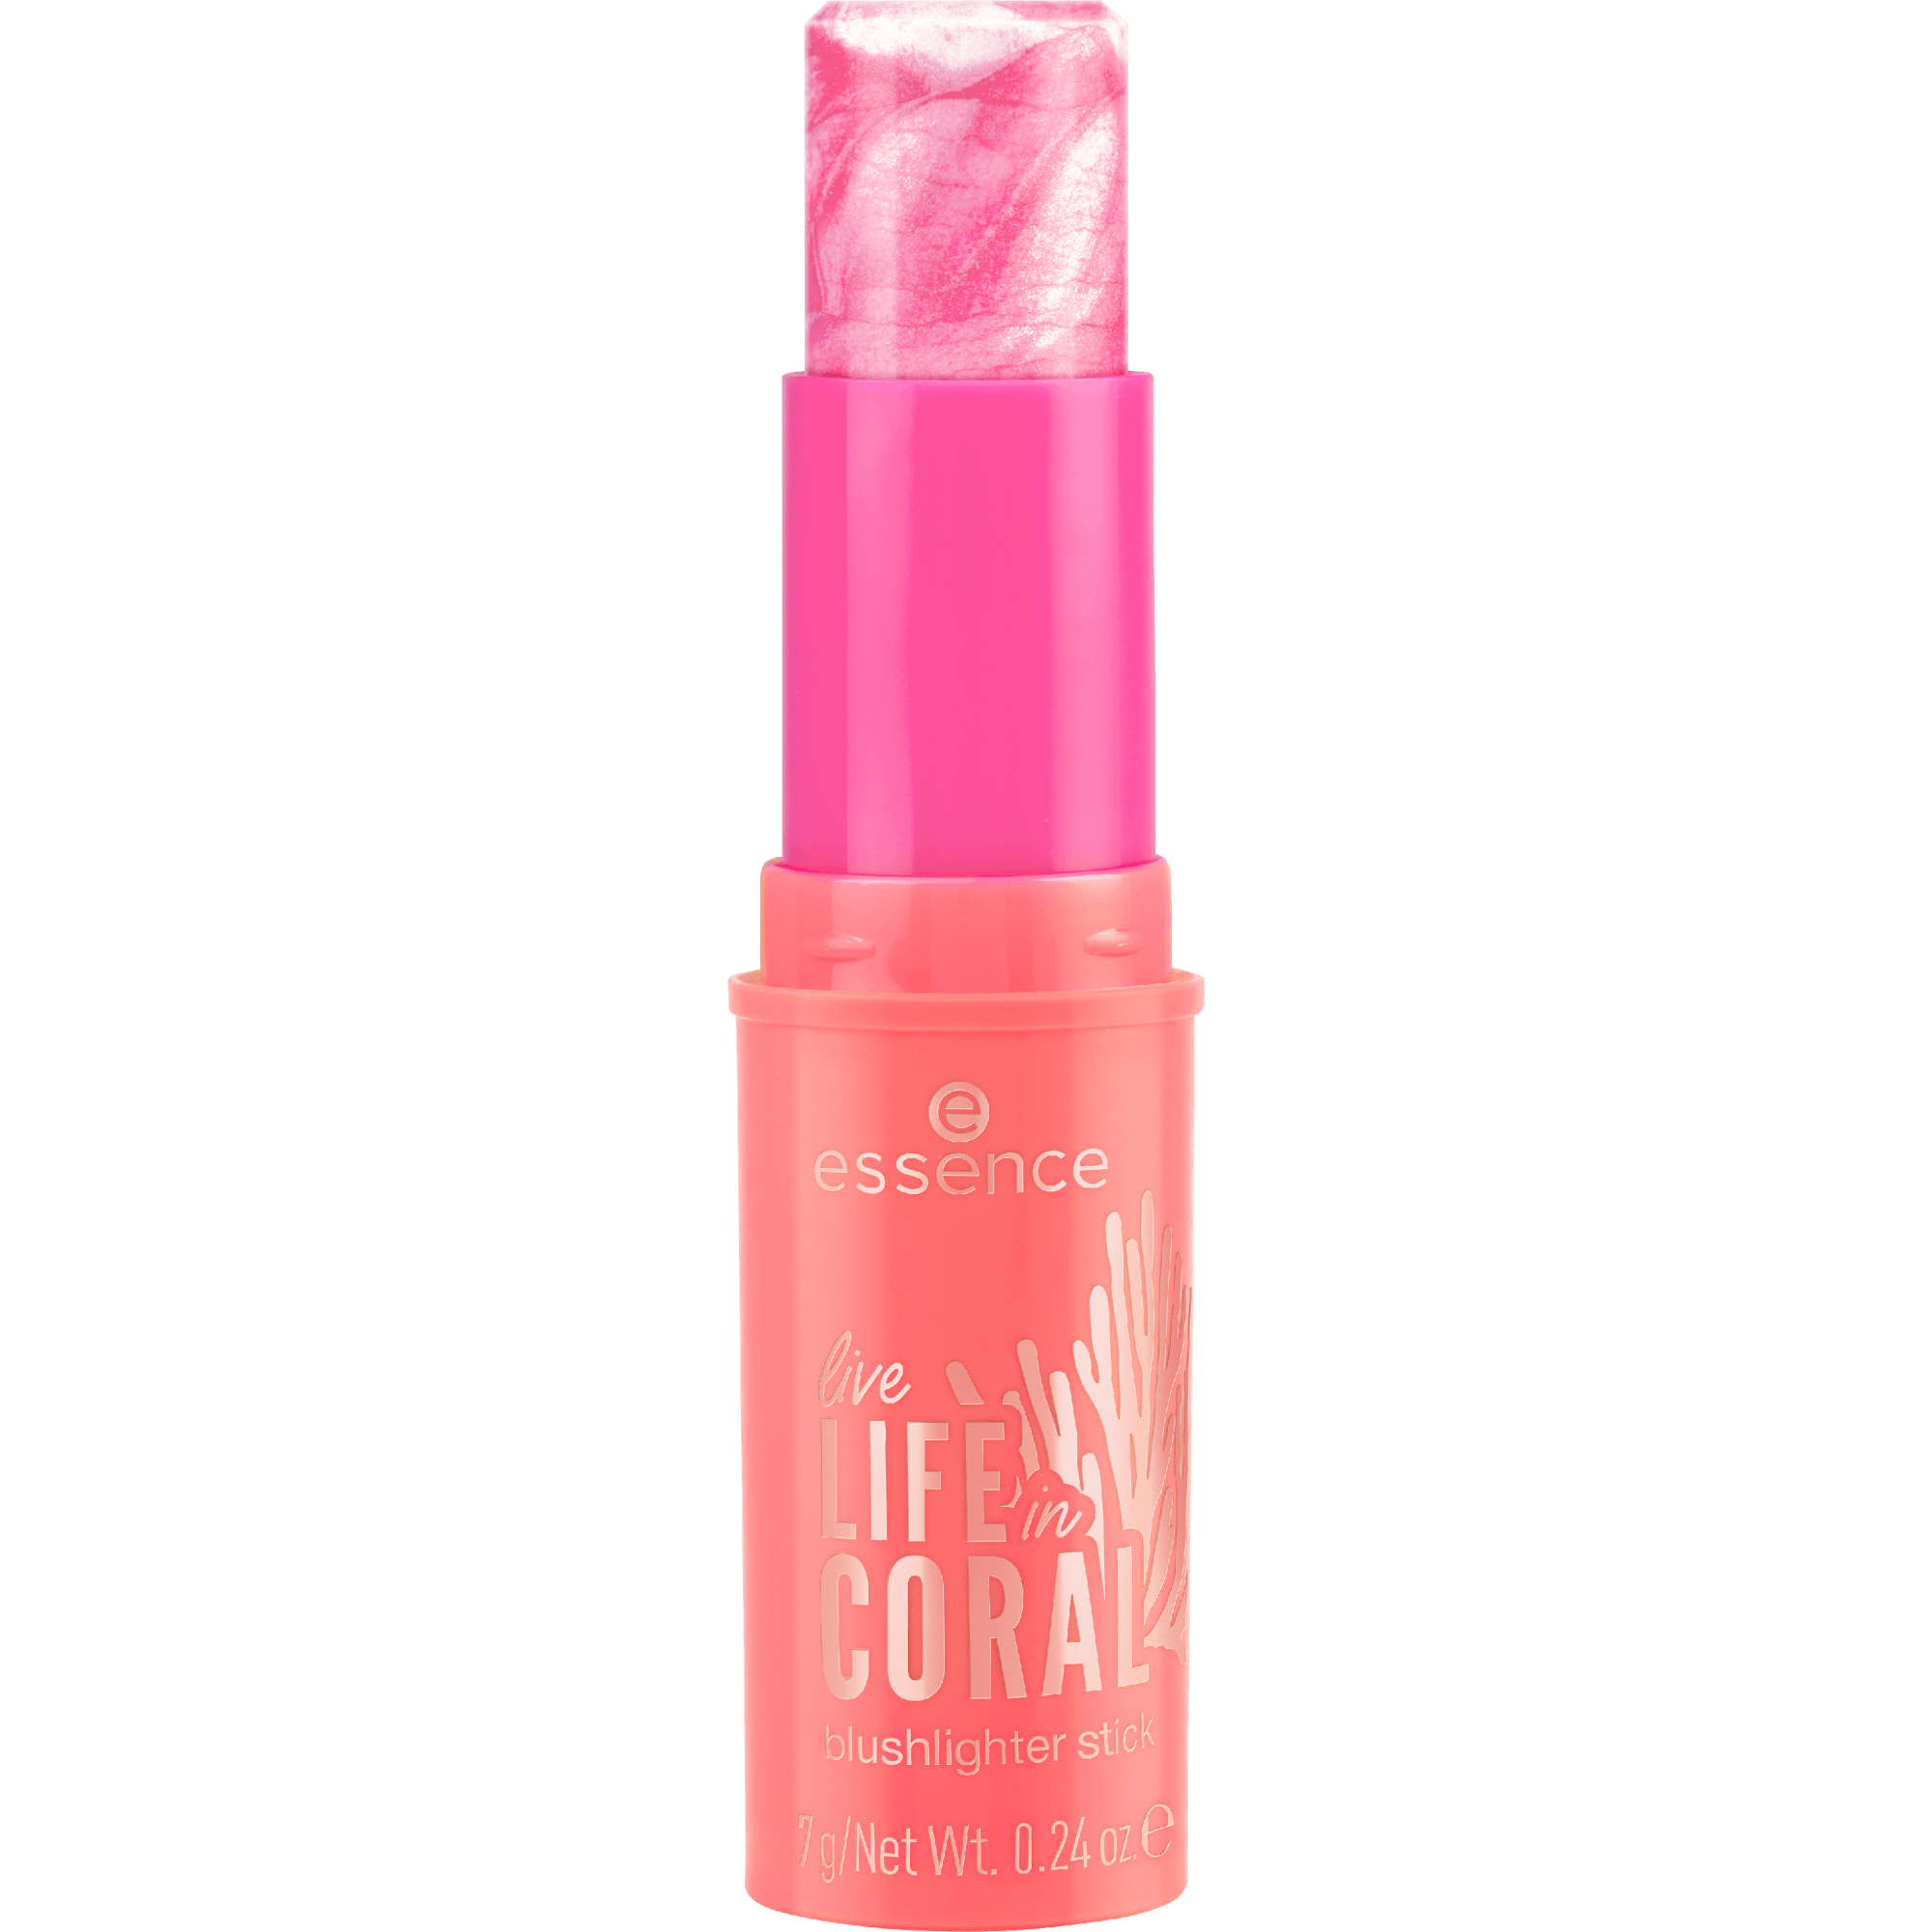 Essence Live Life In Coral Blushlighter Stick 01 7 g